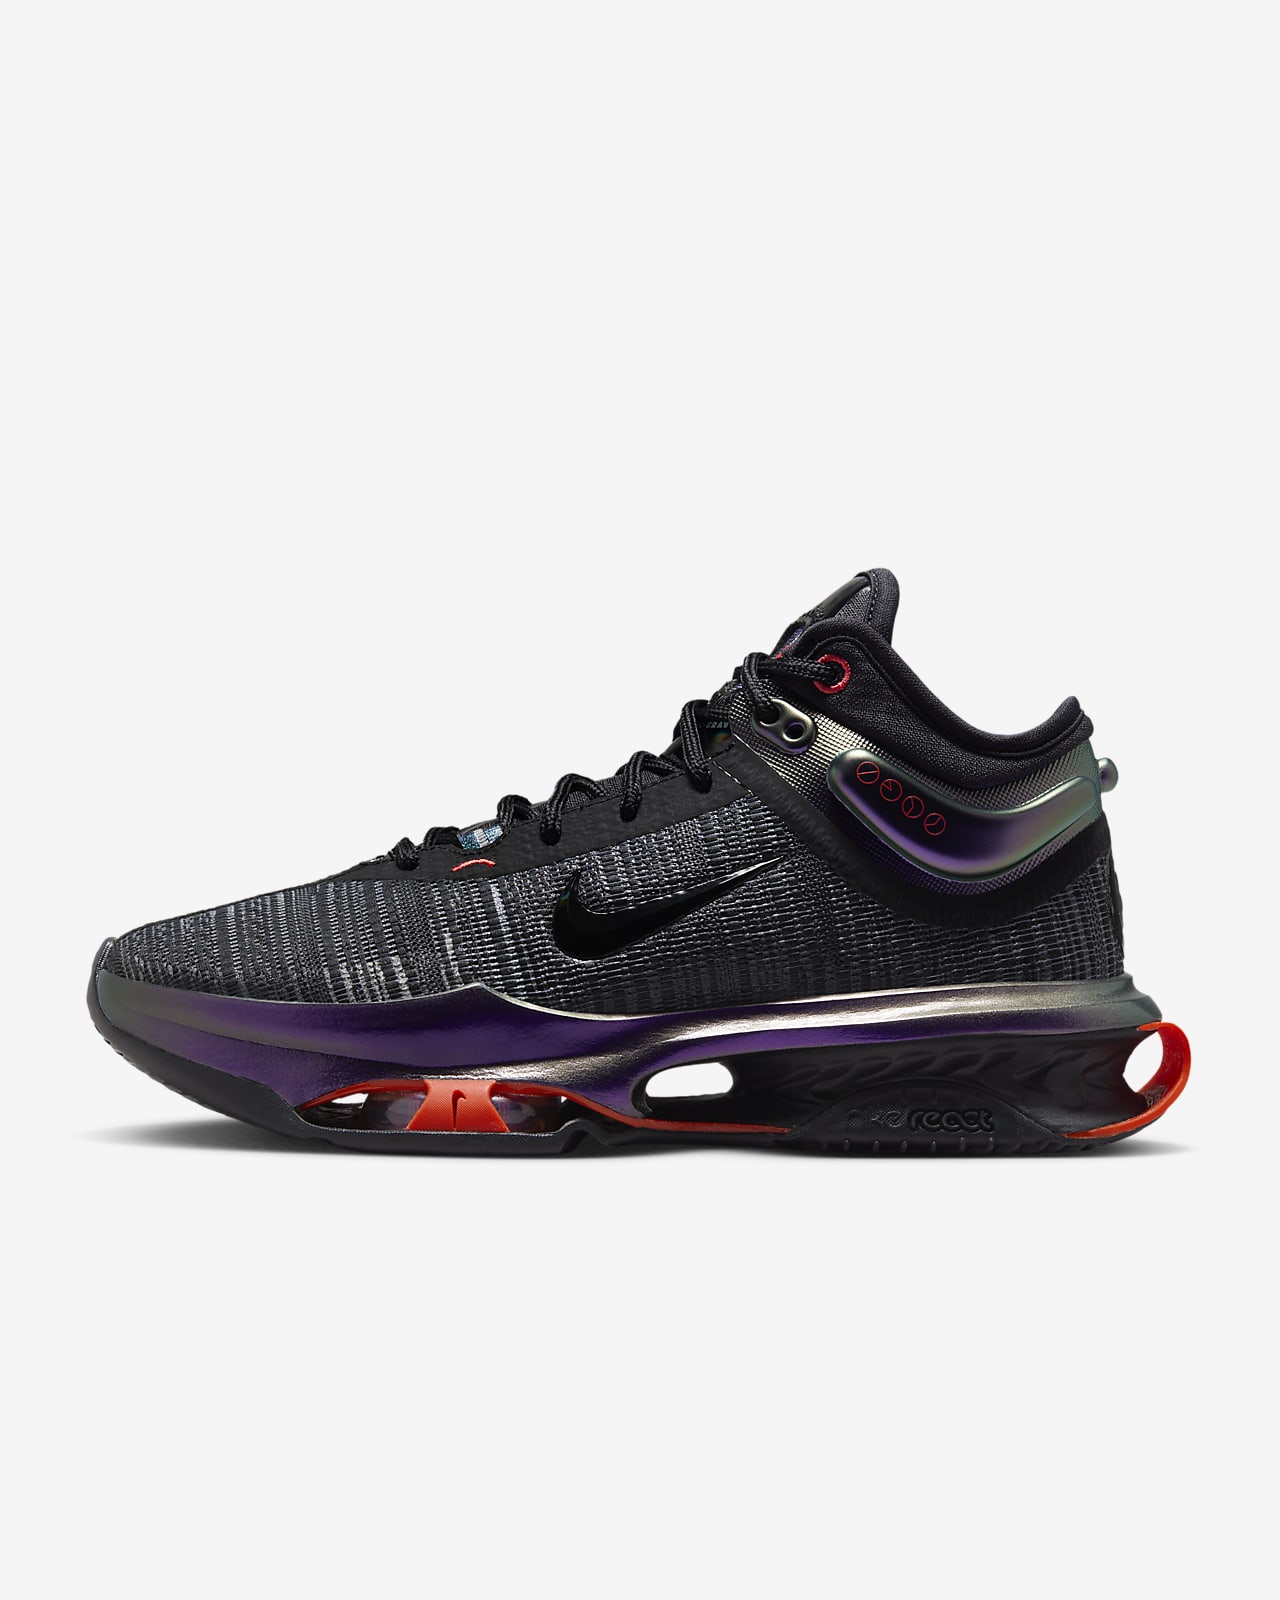 Nike G.T. Jump 2 EP Basketball Shoes